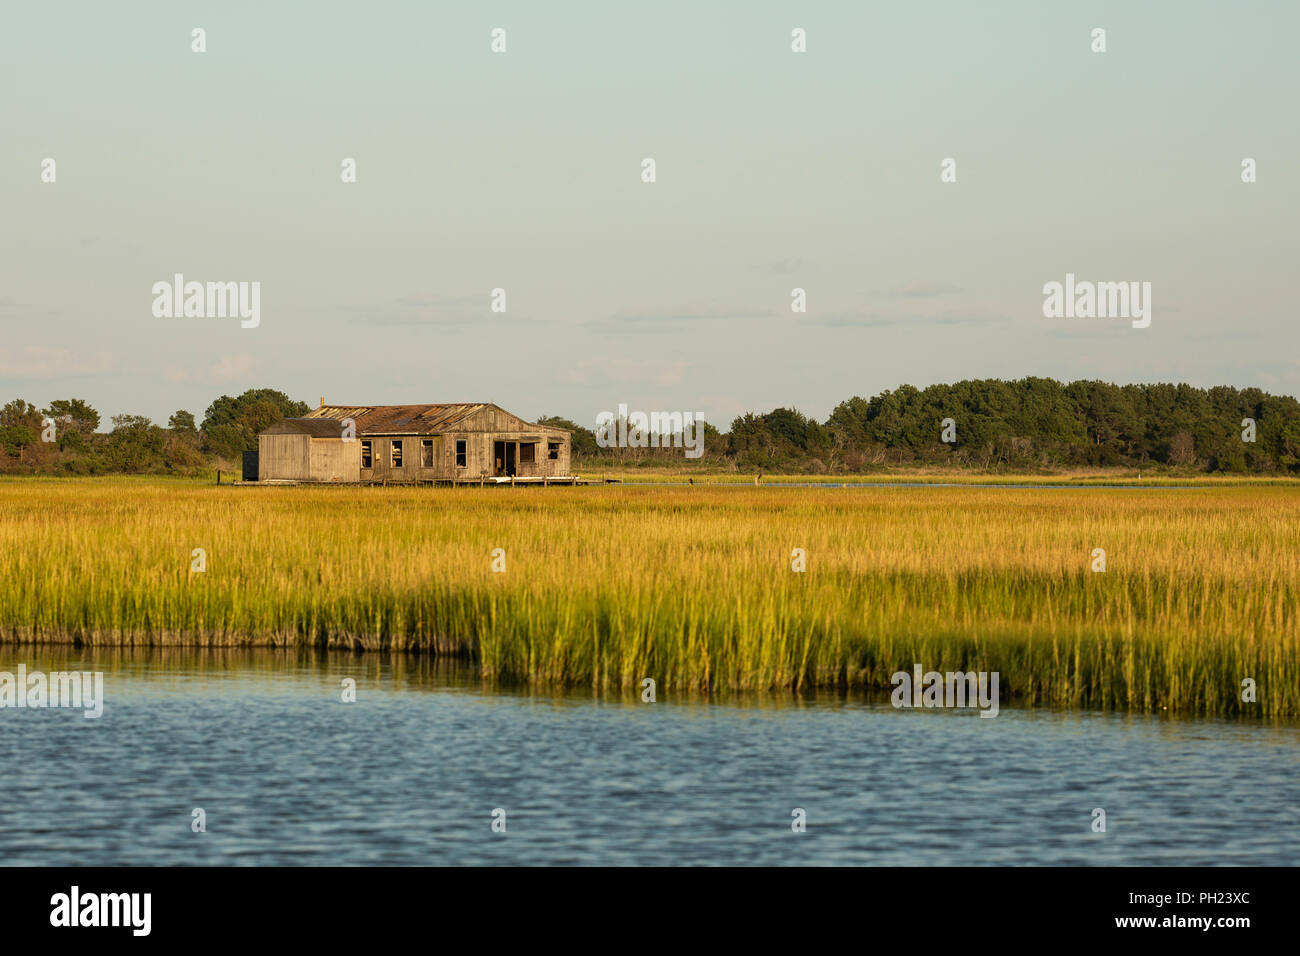 An abandoned cabin among salt marsh cordgrass (Spartina alterniflora) in the salt marshes on the western side of Chincoteague Island, Virginia, USA. Stock Photo